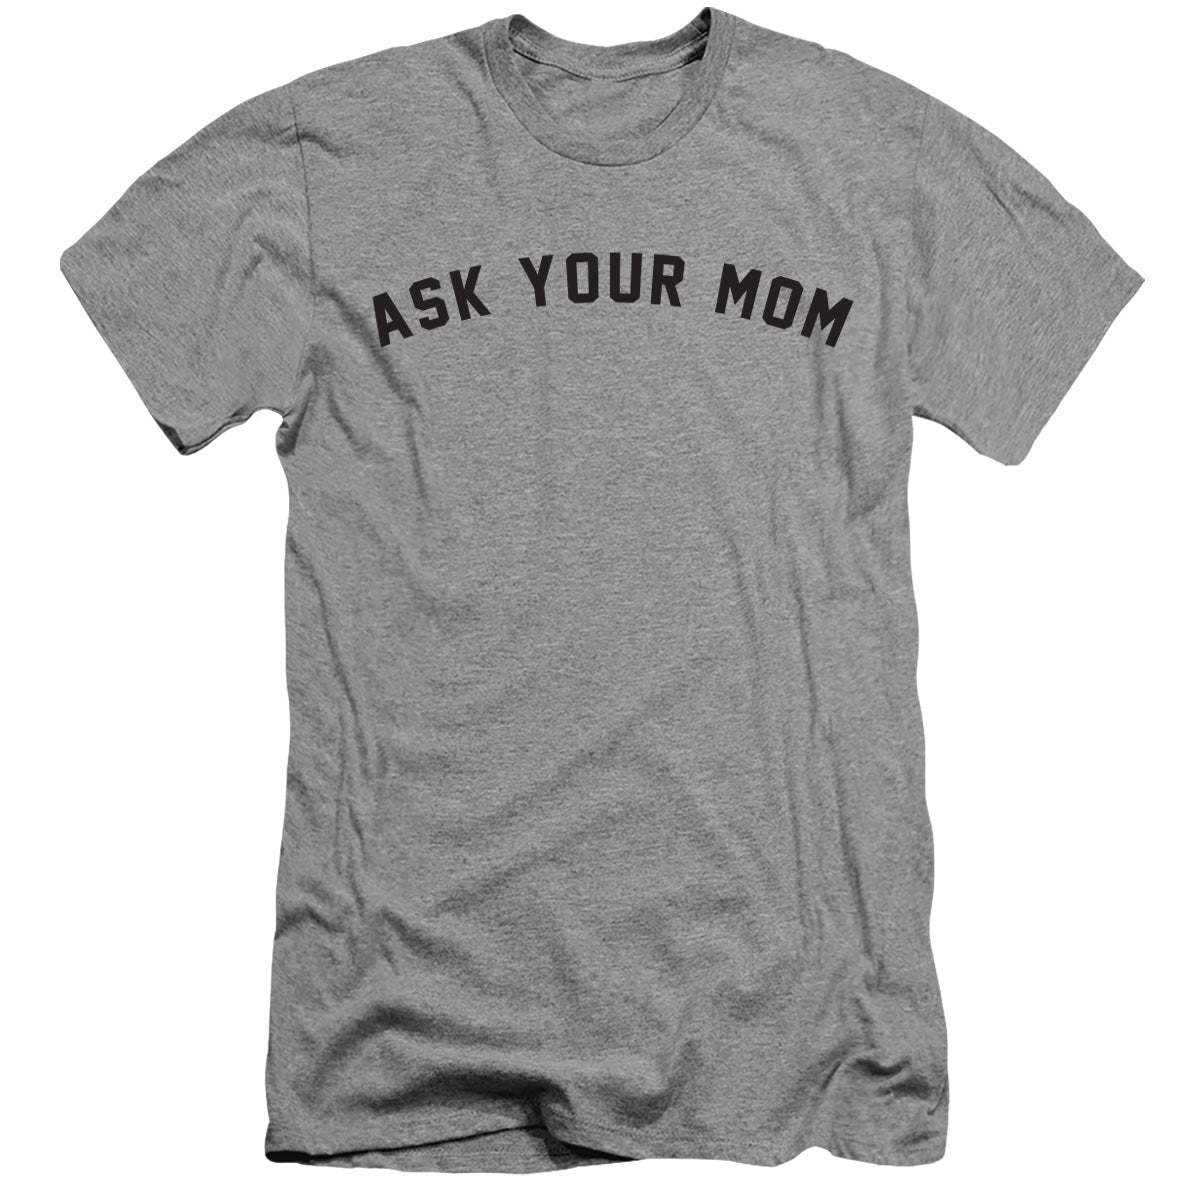 ASK YOUR MOM TEE - GREY